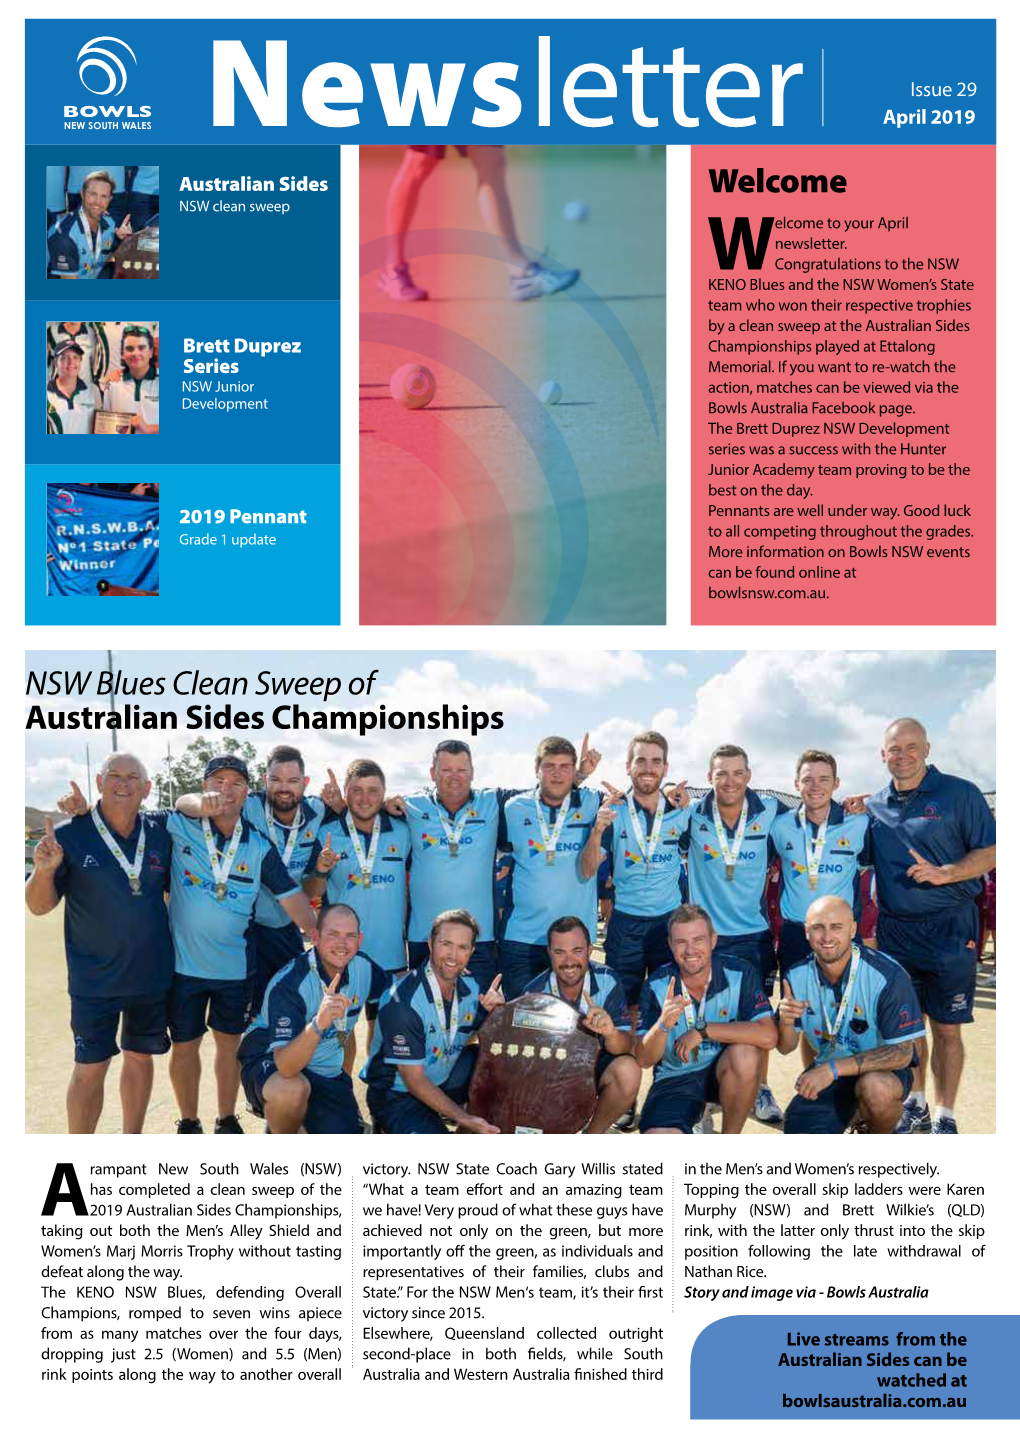 NSW Blues Clean Sweep of Australian Sides Championships